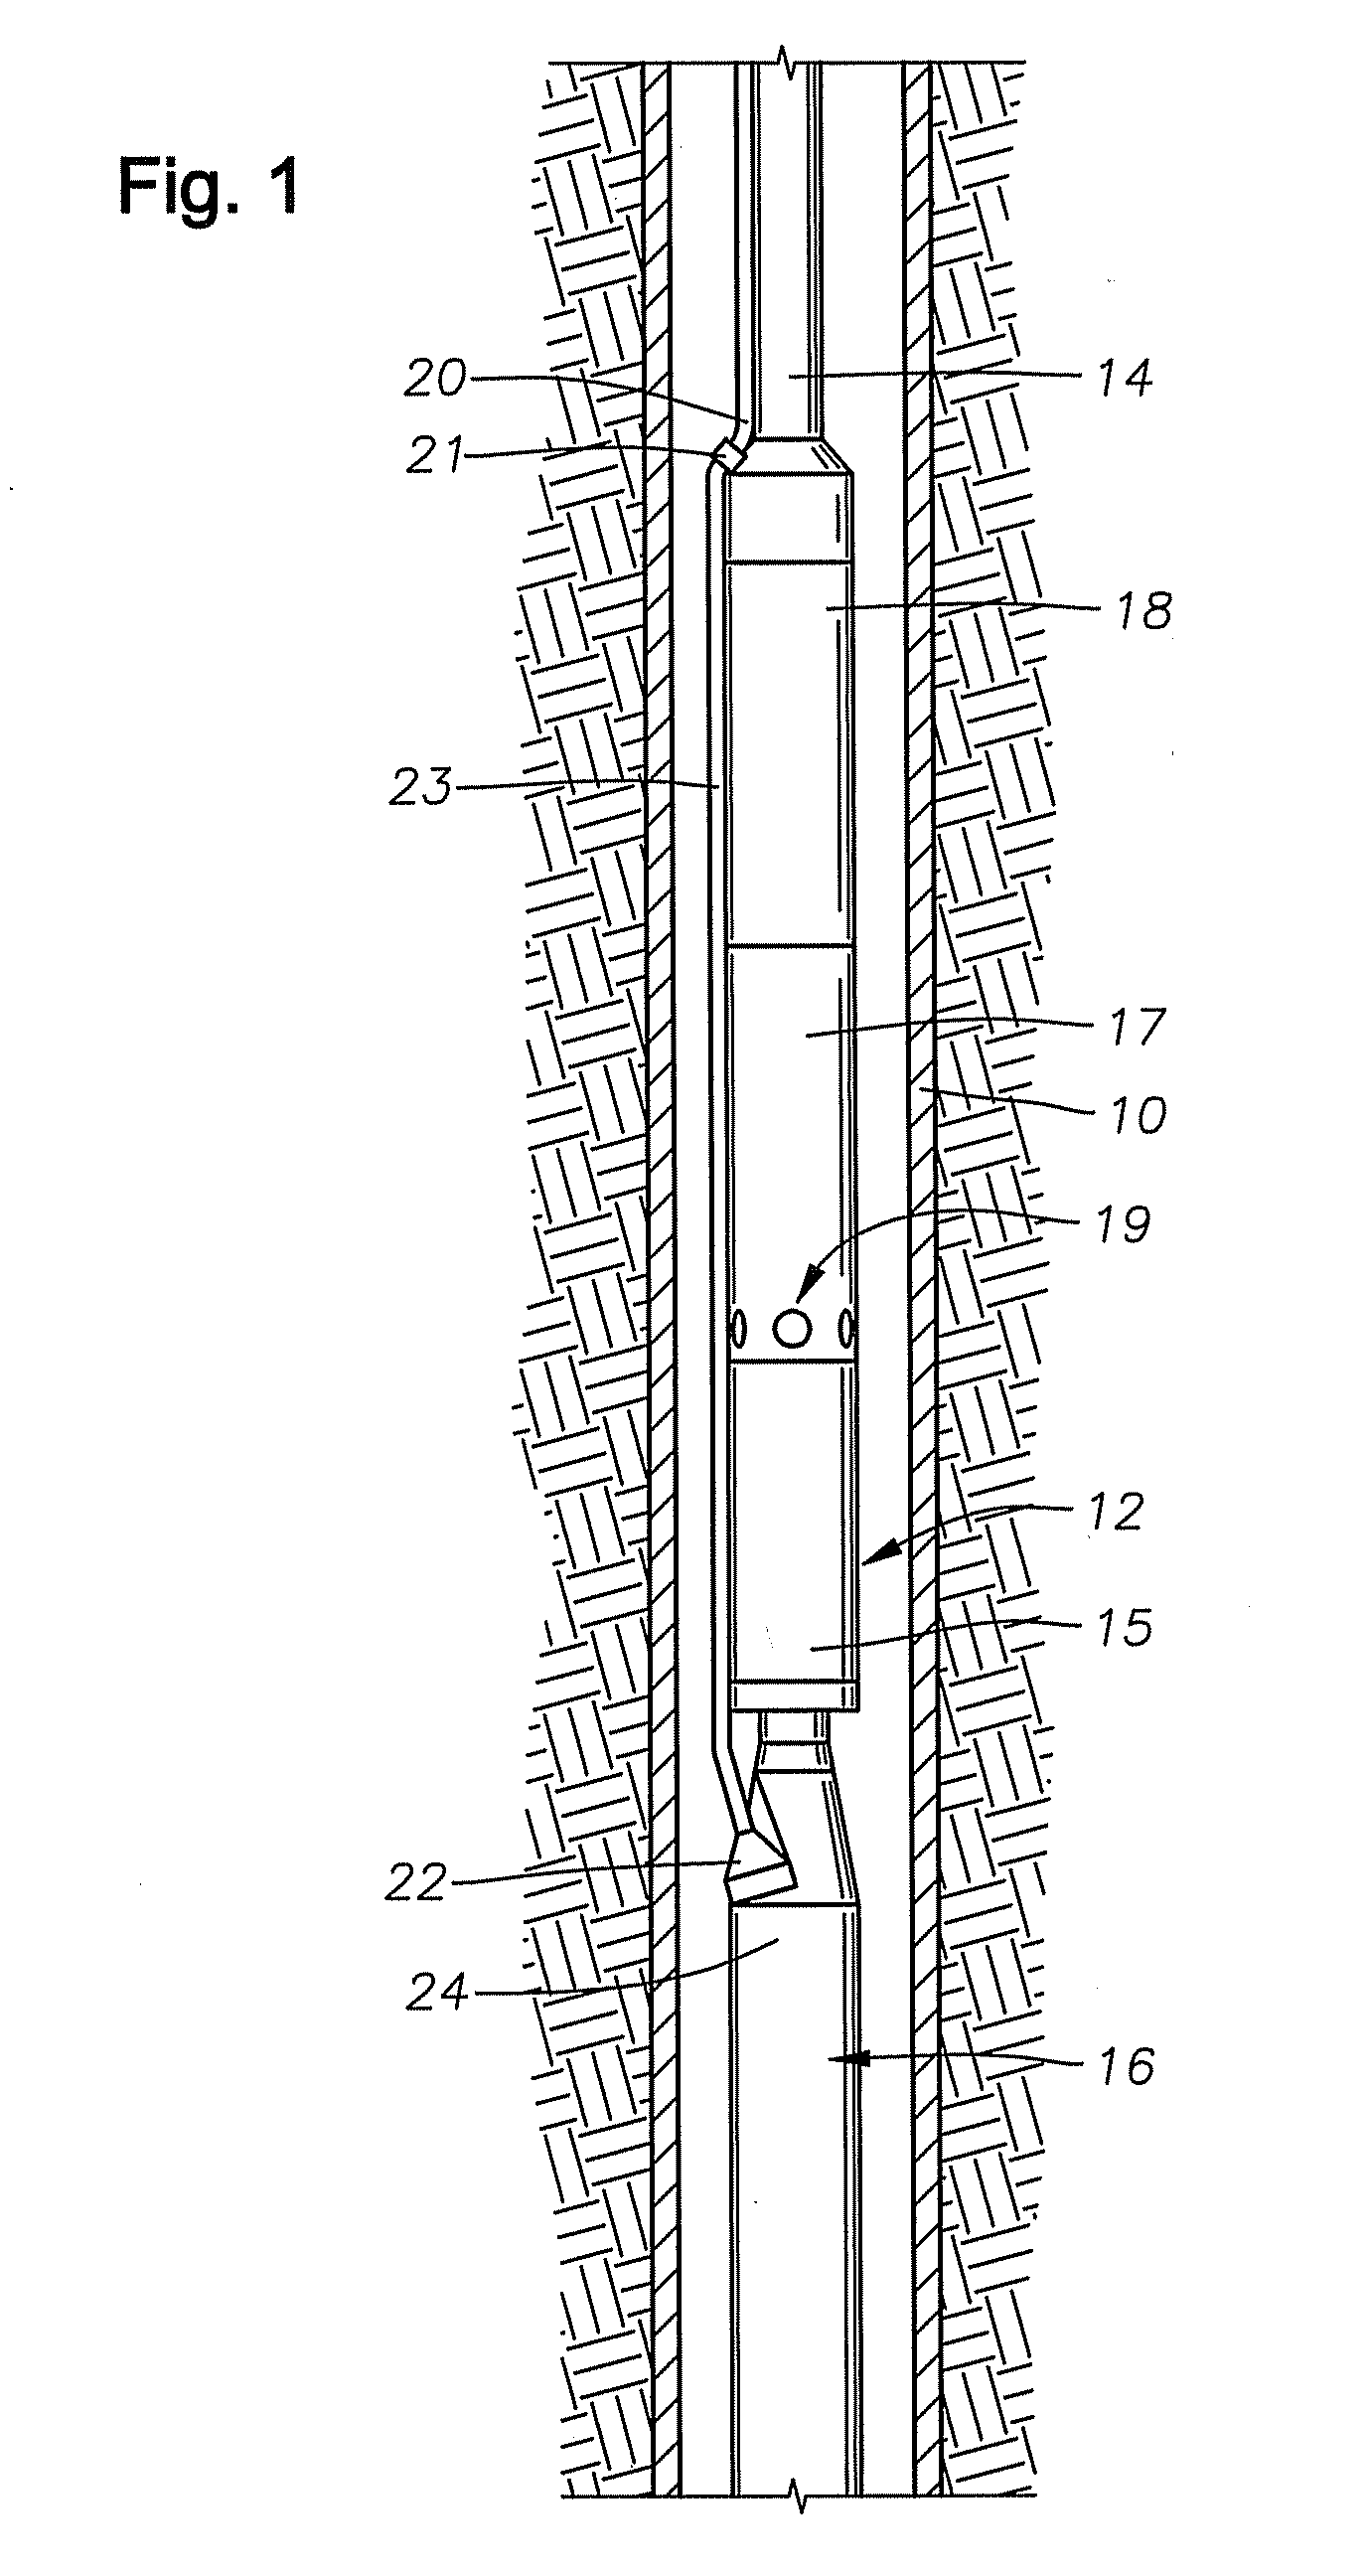 Electrical Submersible Pump System Having High Temperature Insulation Materials and Buffered Lubricant